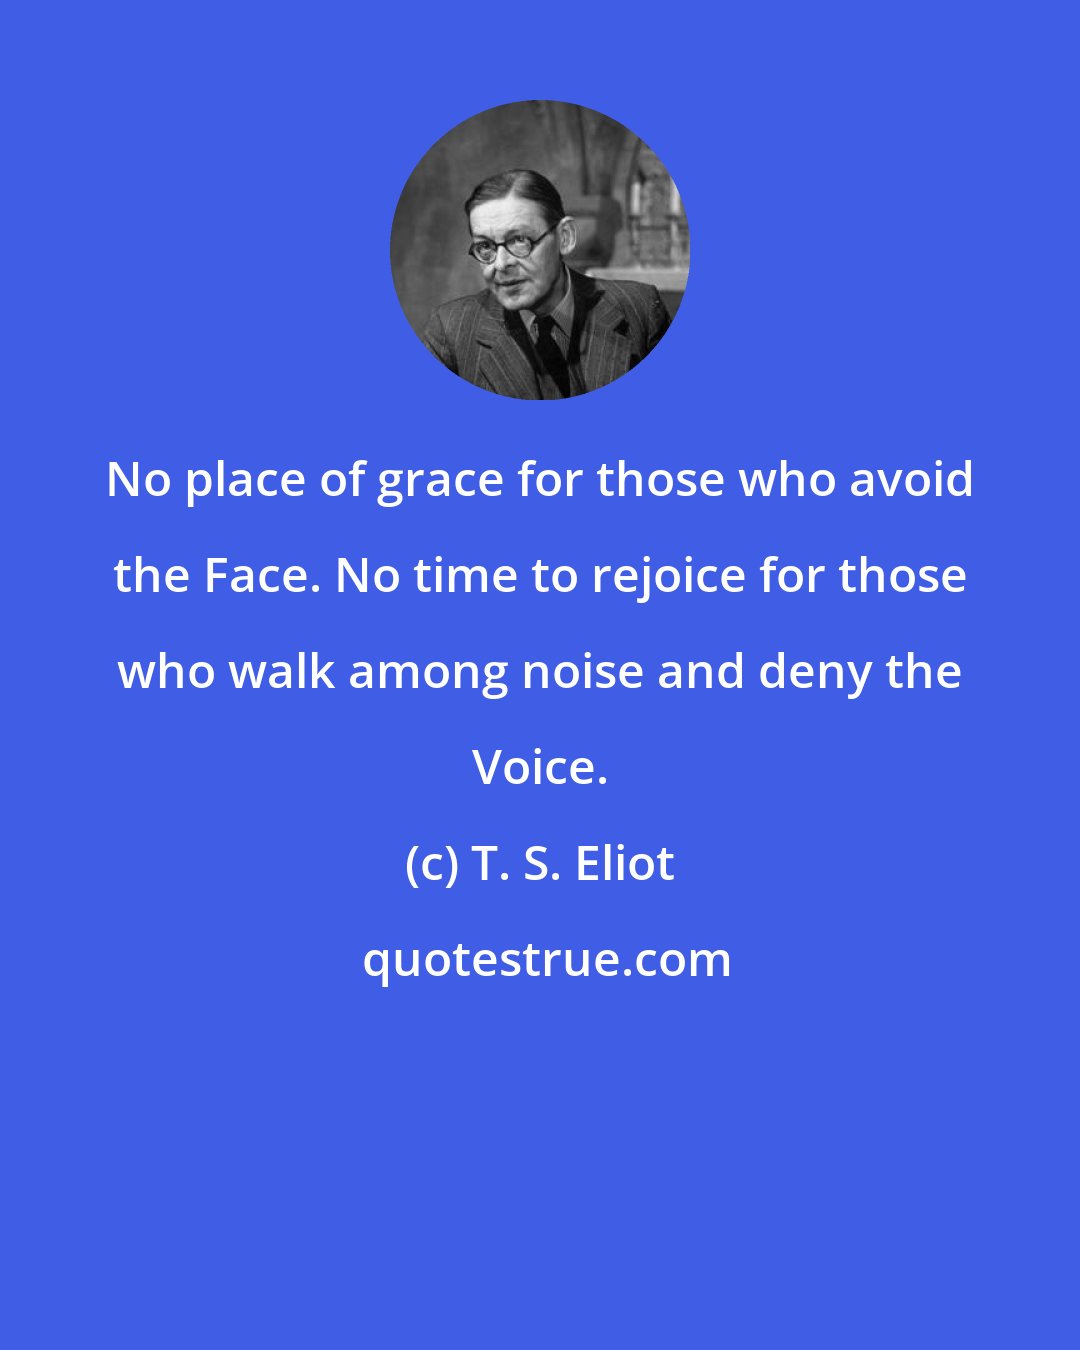 T. S. Eliot: No place of grace for those who avoid the Face. No time to rejoice for those who walk among noise and deny the Voice.